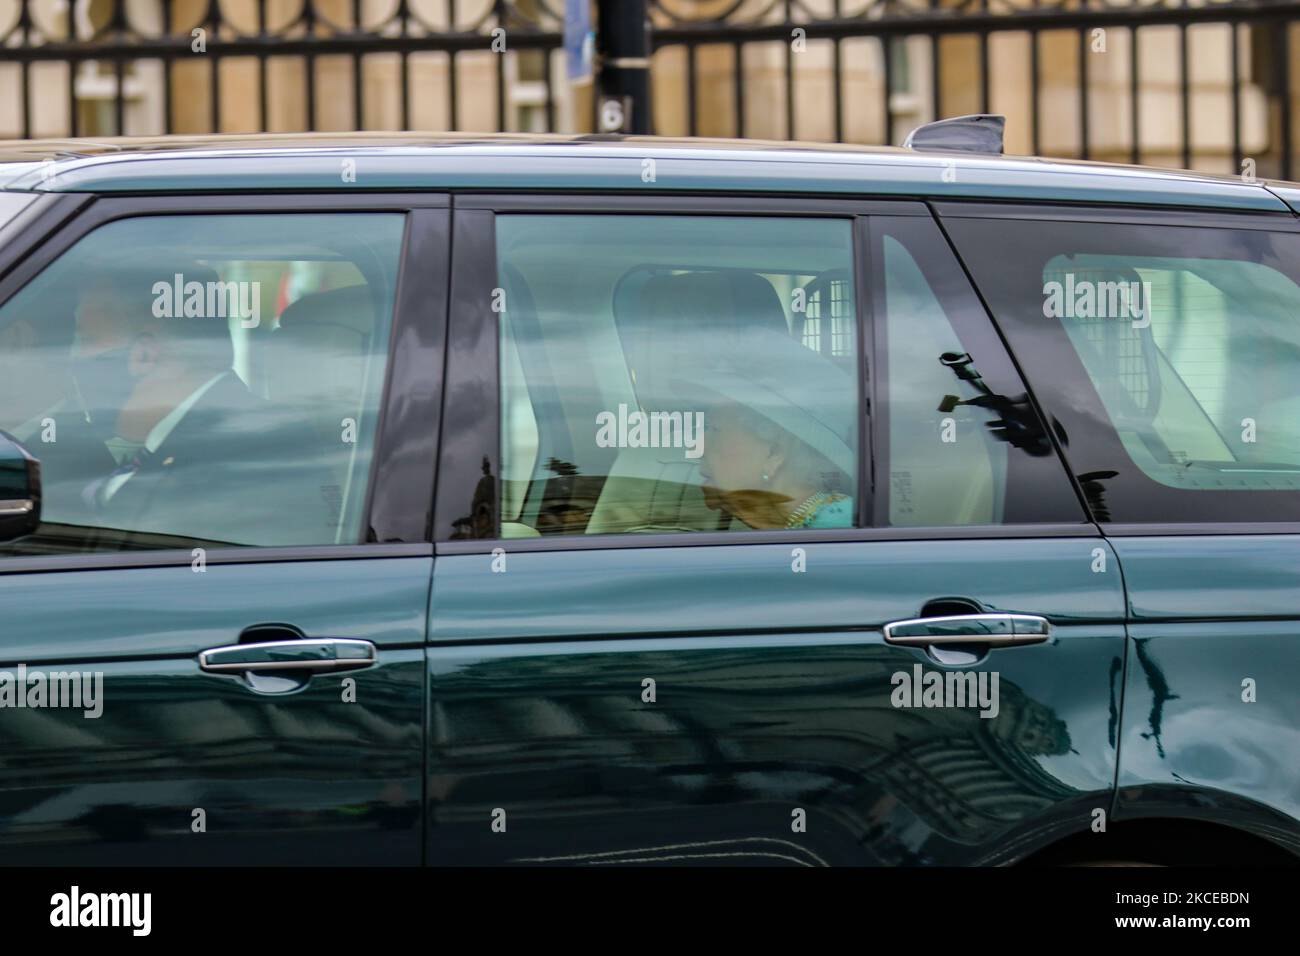 HM Queen Elizabeth II arrives at Westminster prior to giving the State Opening of Parliament on Tuesday 11th May 2021. (Photo by Lucy North/MI News/NurPhoto) Stock Photo